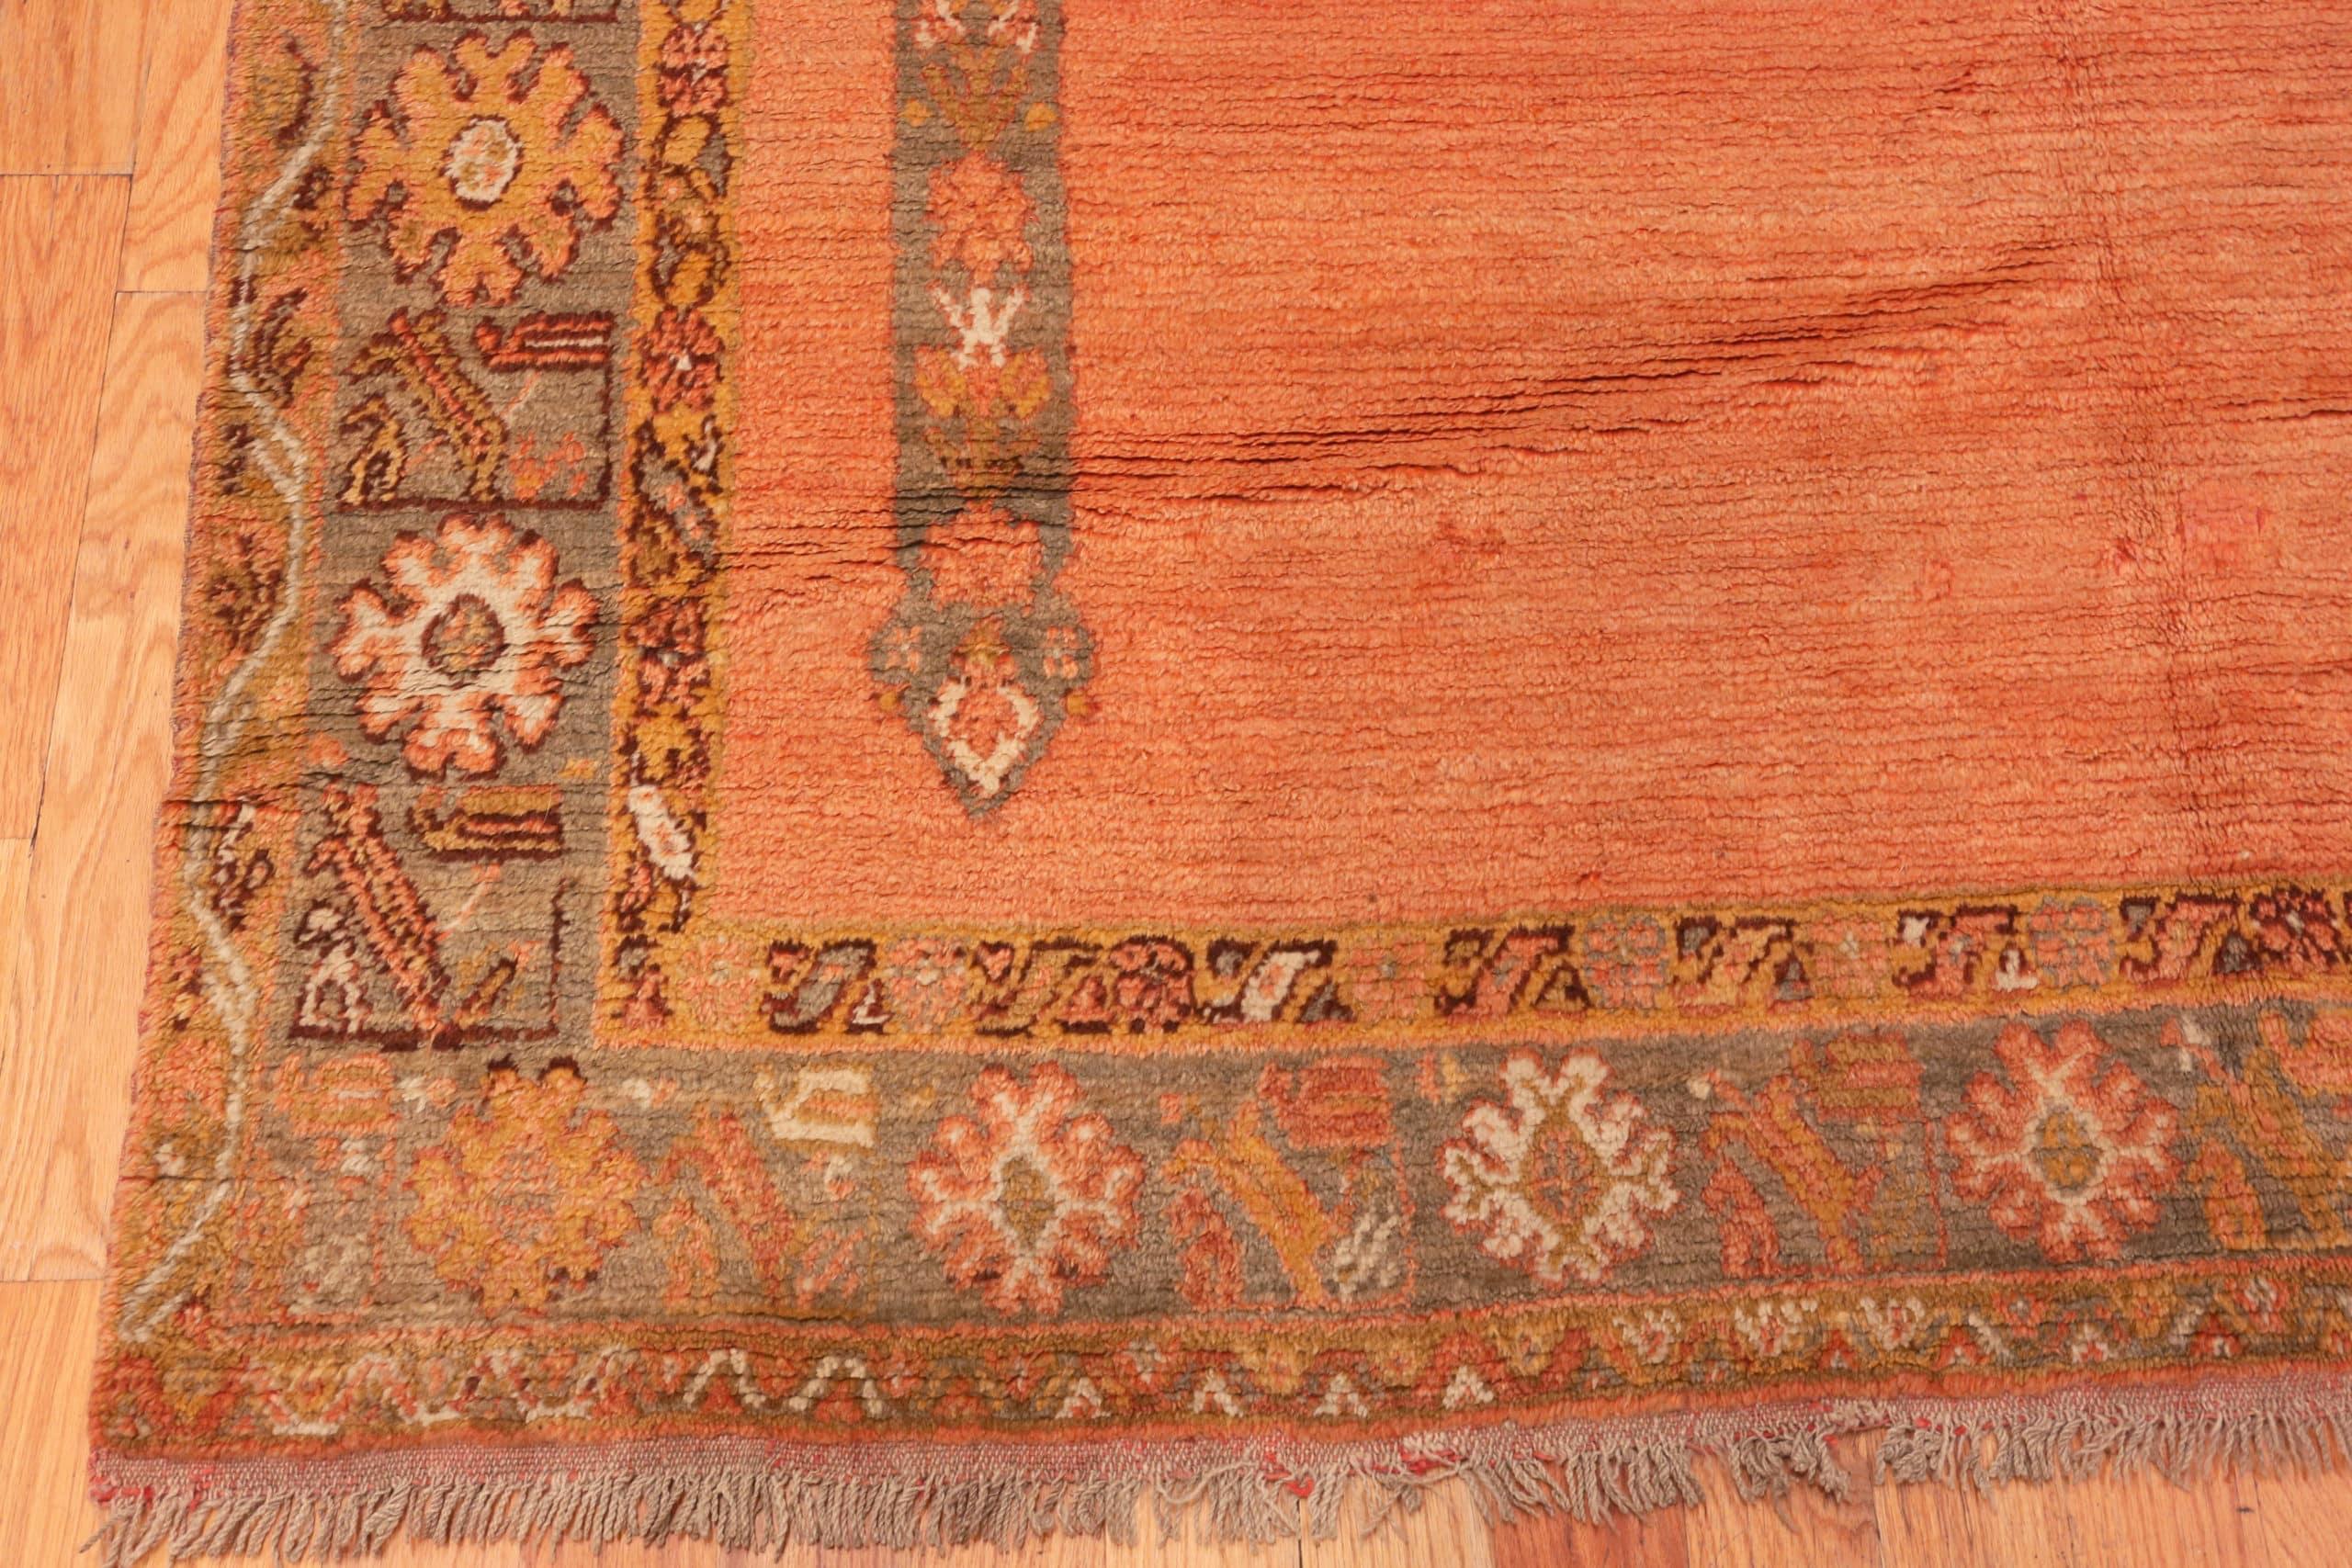 20th Century Antique Turkish Oushak Prayer Rug. Size: 6 ft 6 in x 7 ft 8 in